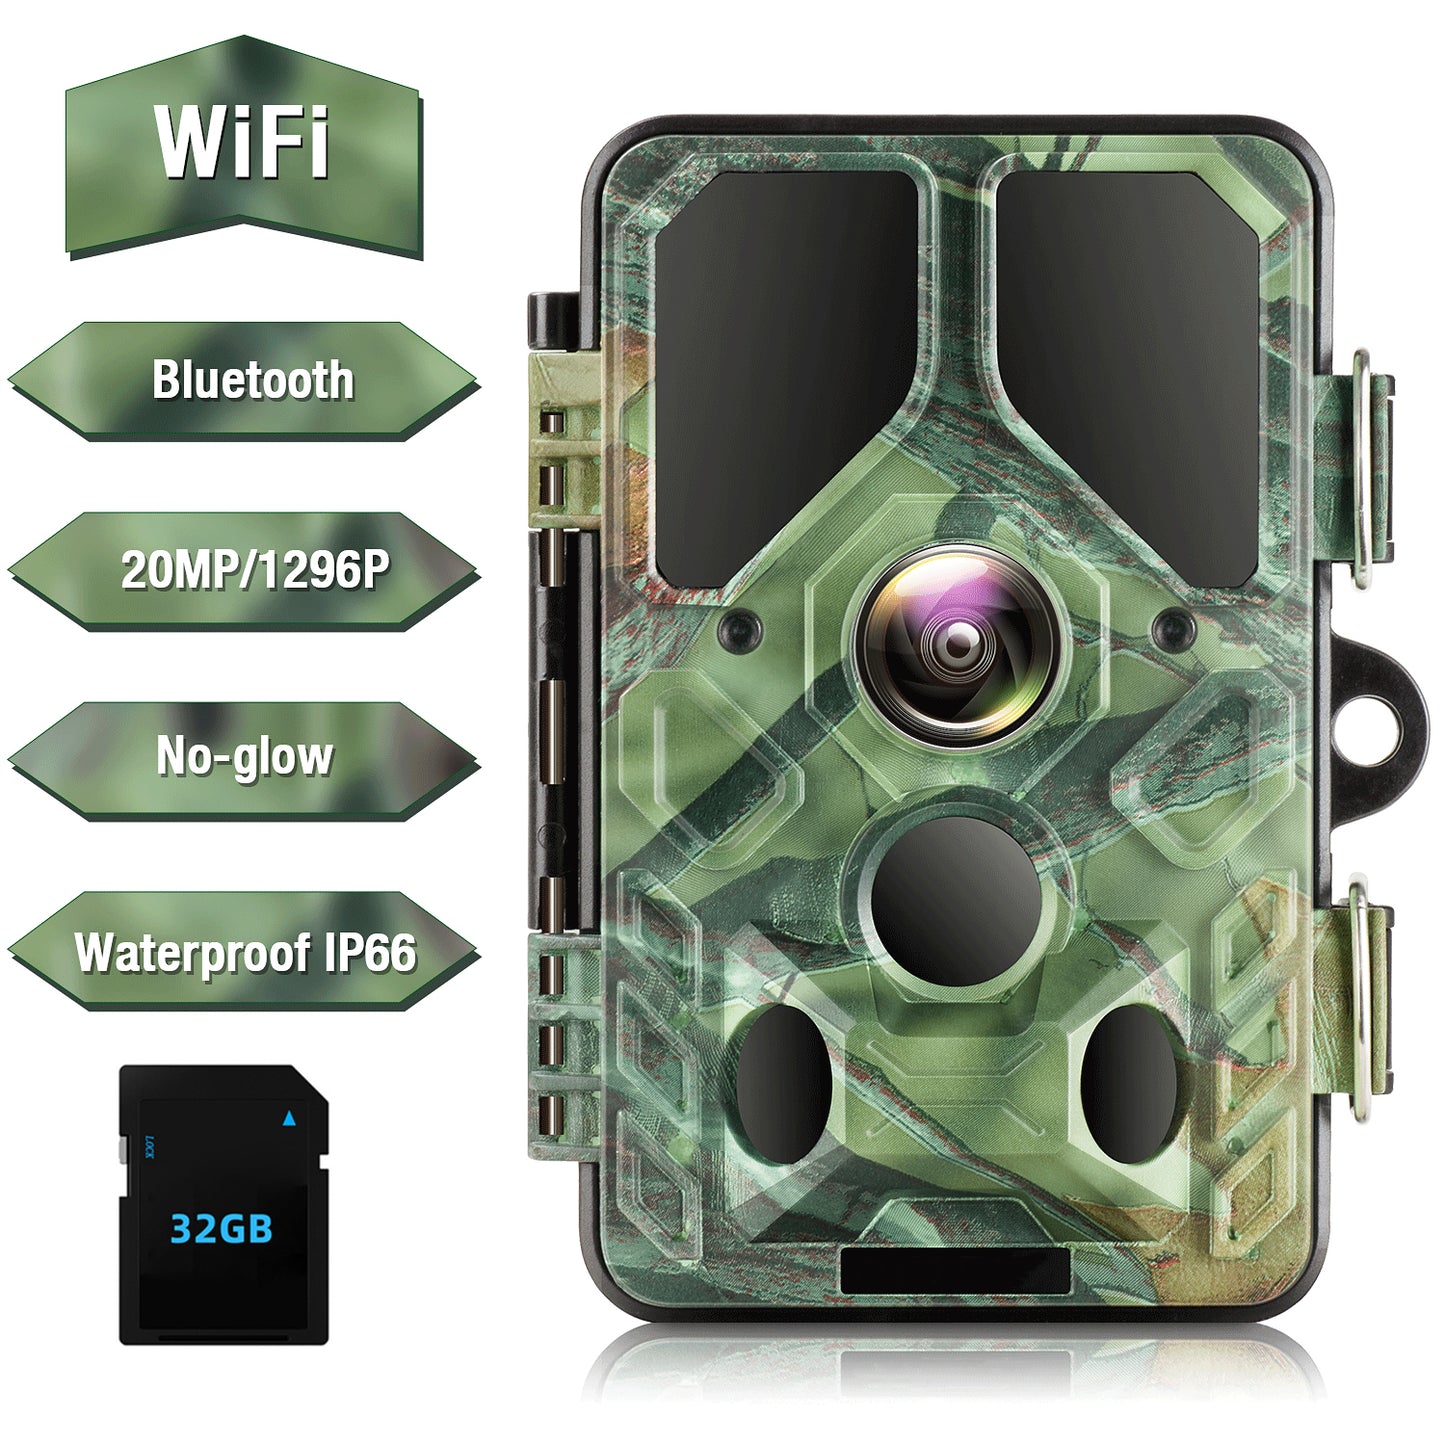 CAMPARK WiFi Trail Camera with SD Card 20MP 1296P Hunting Game Camera with 940nm IR LEDs Night Vision Motion Activated Waterproof 2.4" LCD Wildlife Monitoring Trail Cam